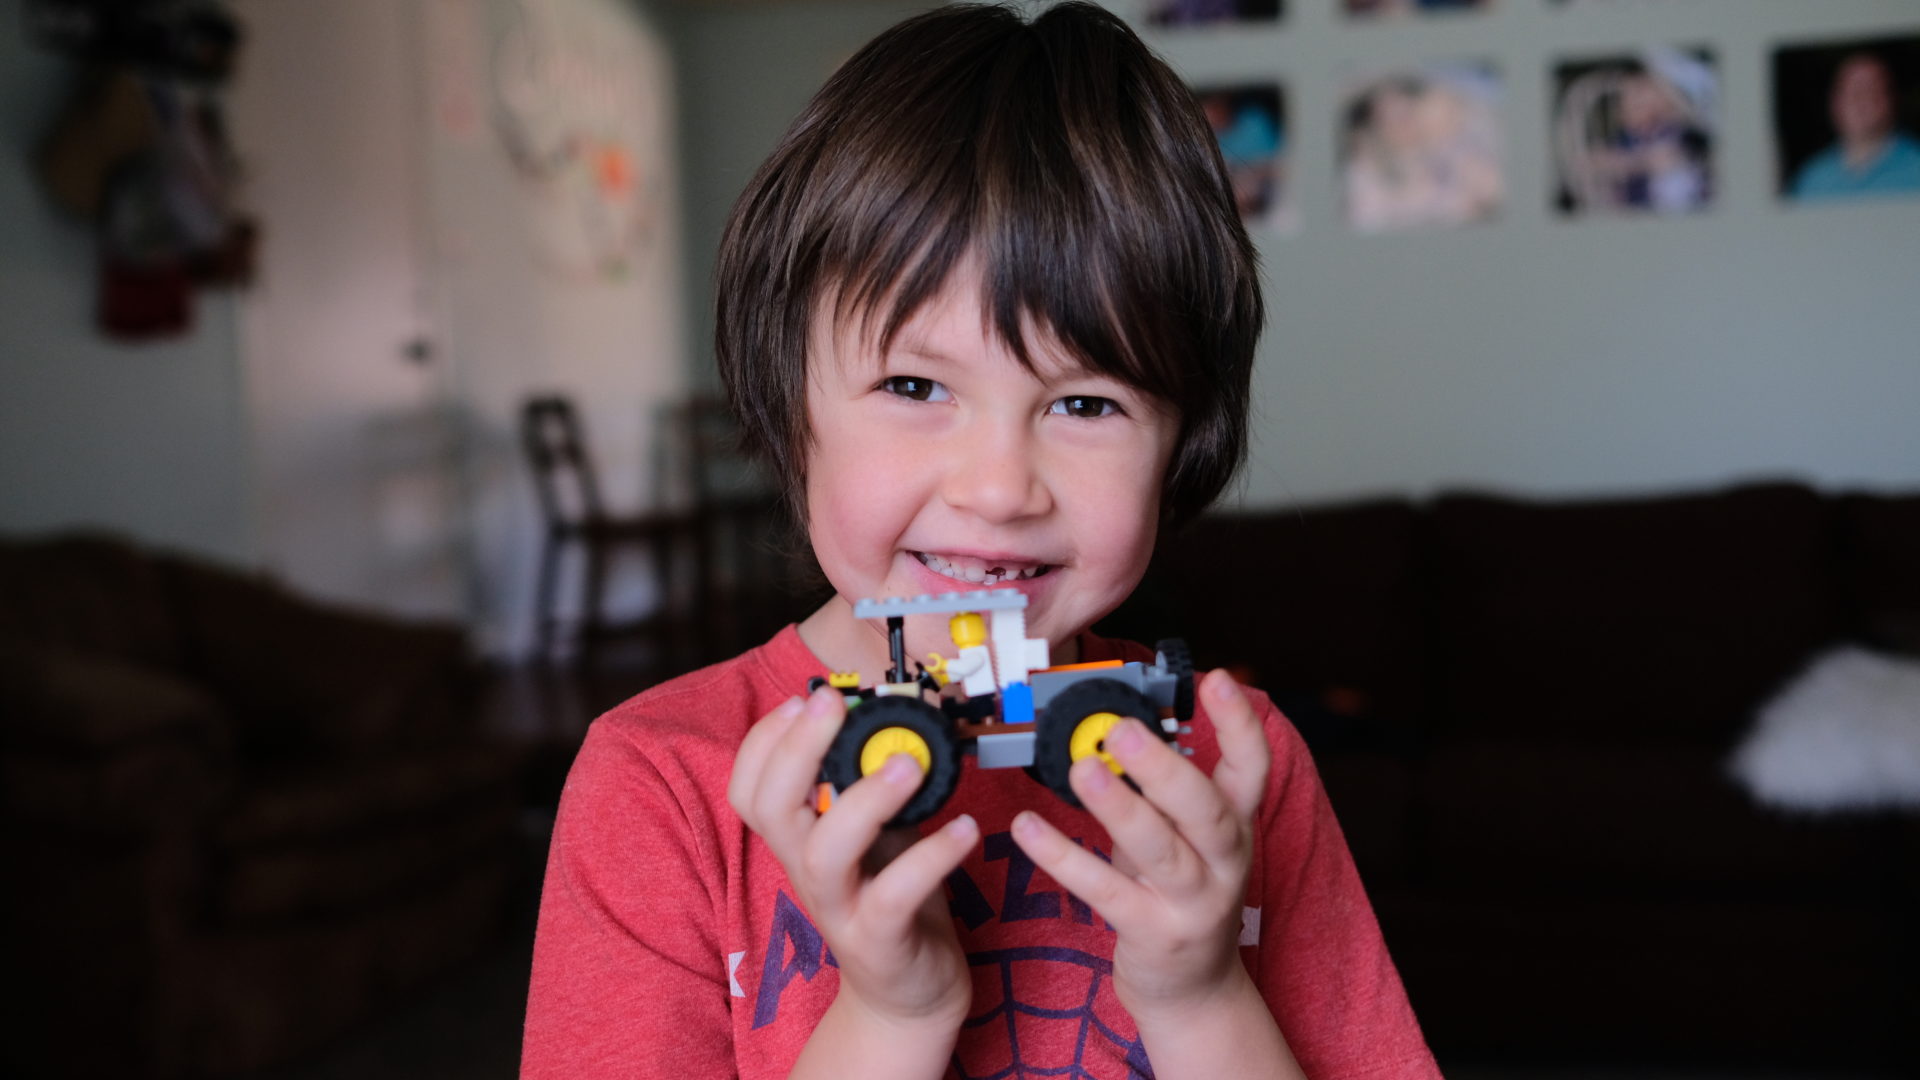 Emmett shows off the LEGO truck that he built on his own, no plans.